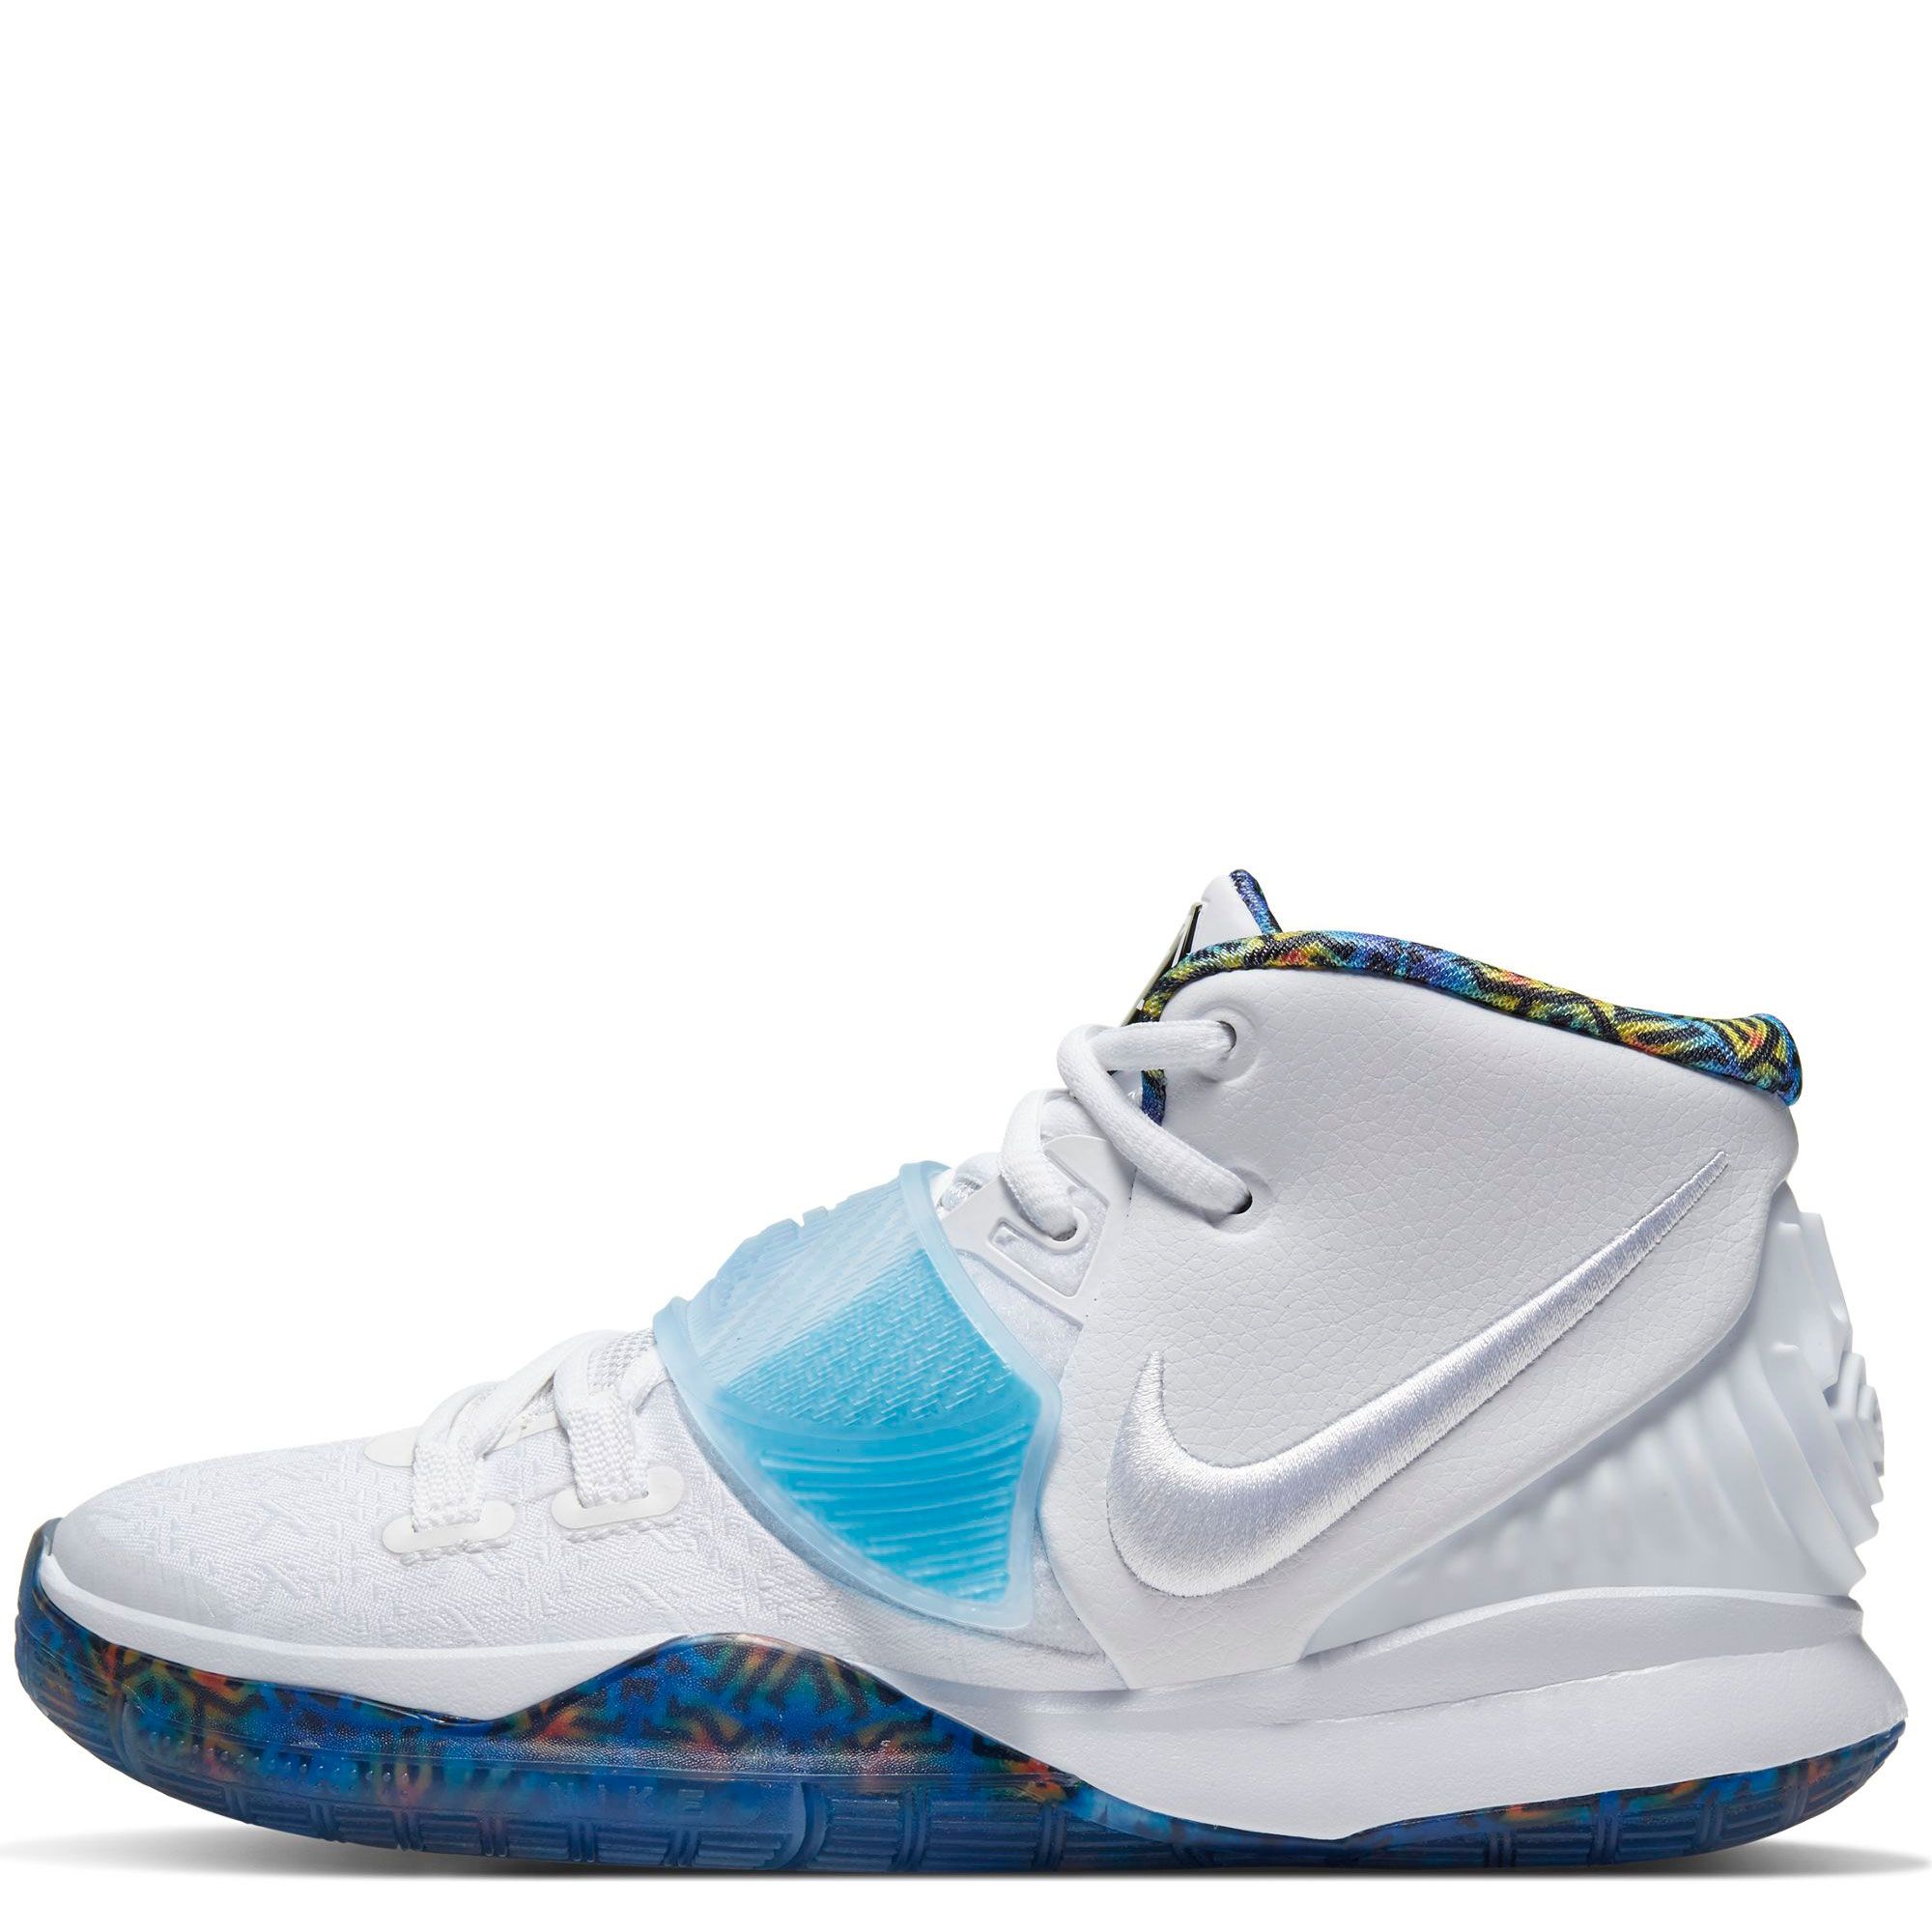 kyrie gs shoes